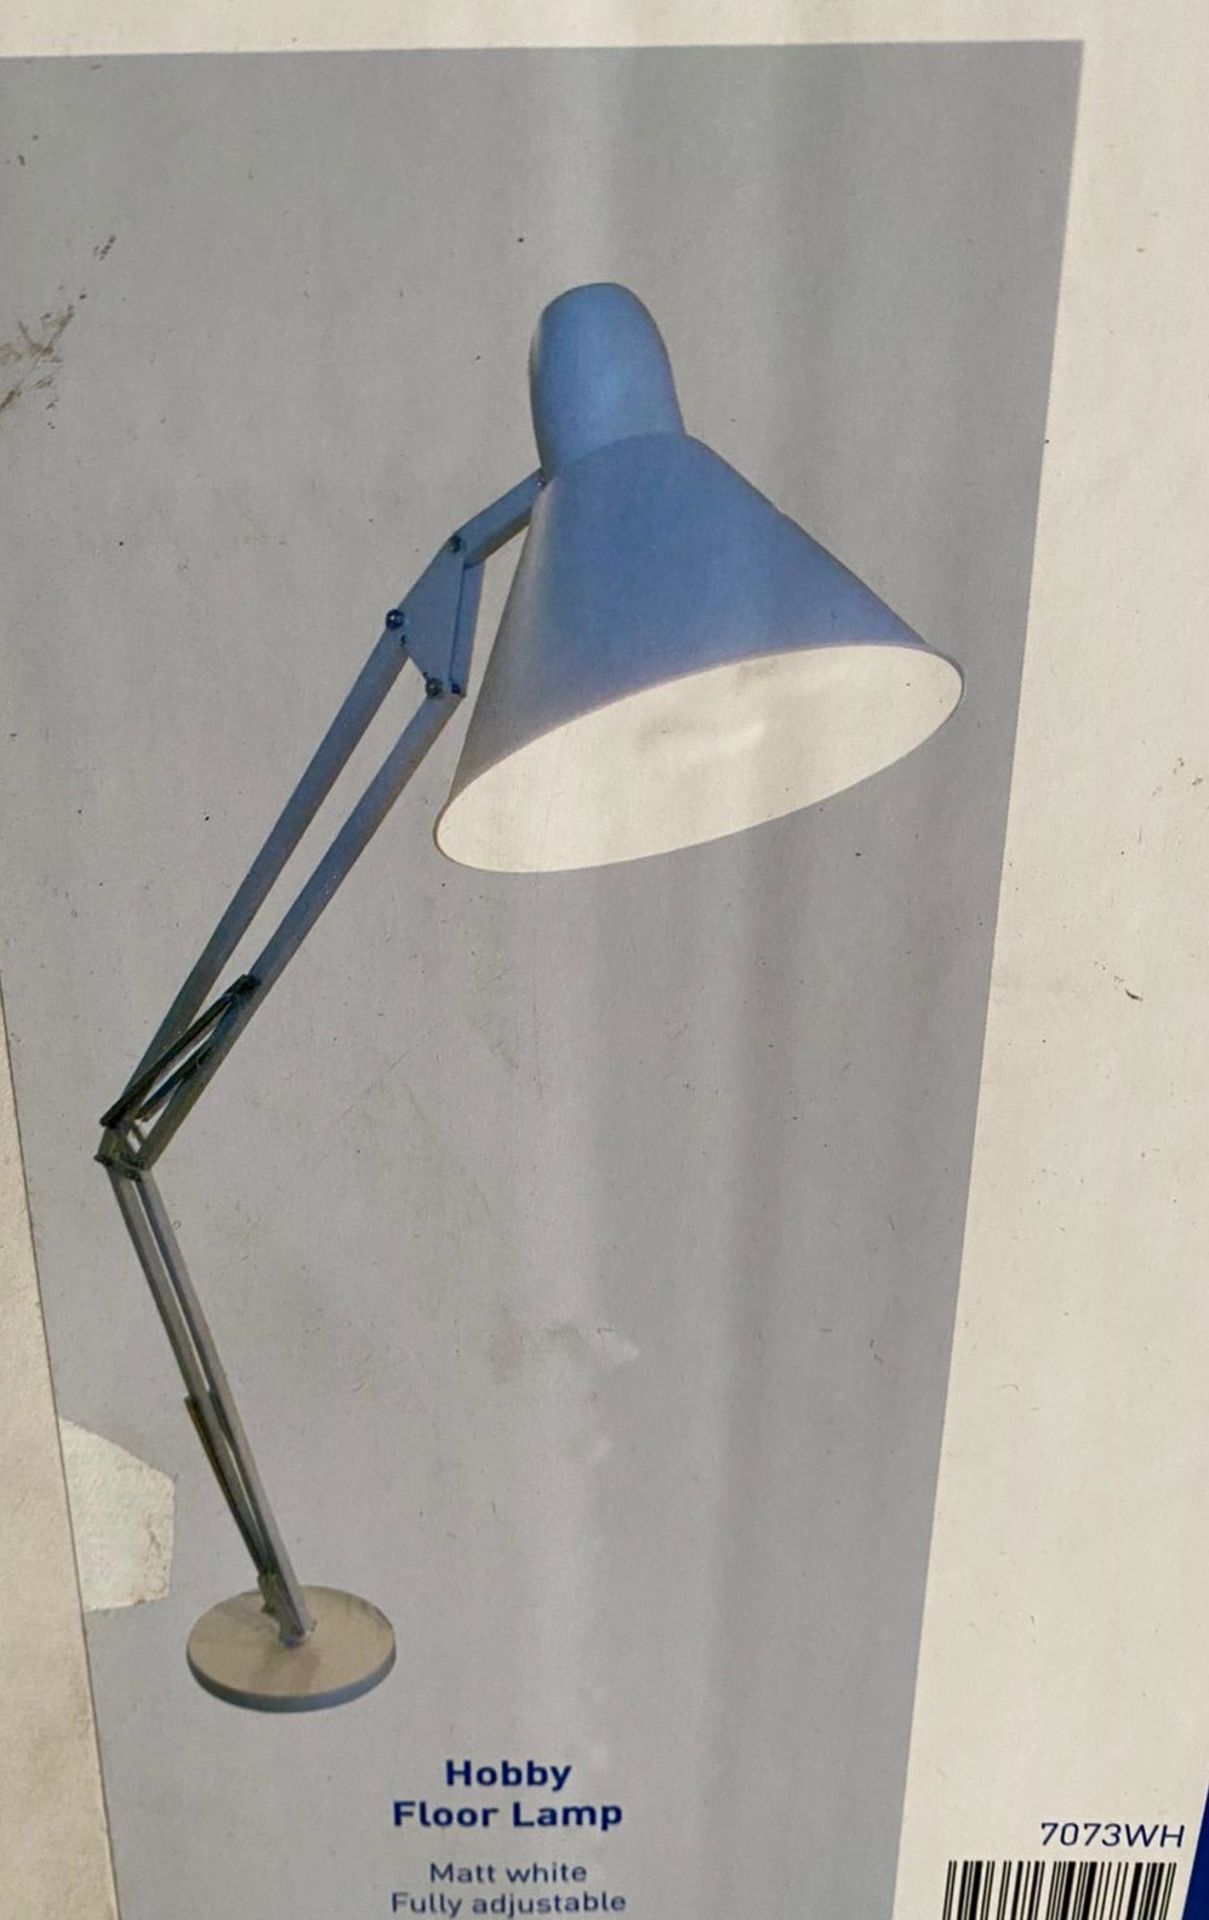 1 x Searchlight Hobby Floor Lamp in matt white- Ref: 7073WH - New and Boxed - RRP: £180 - Image 4 of 4